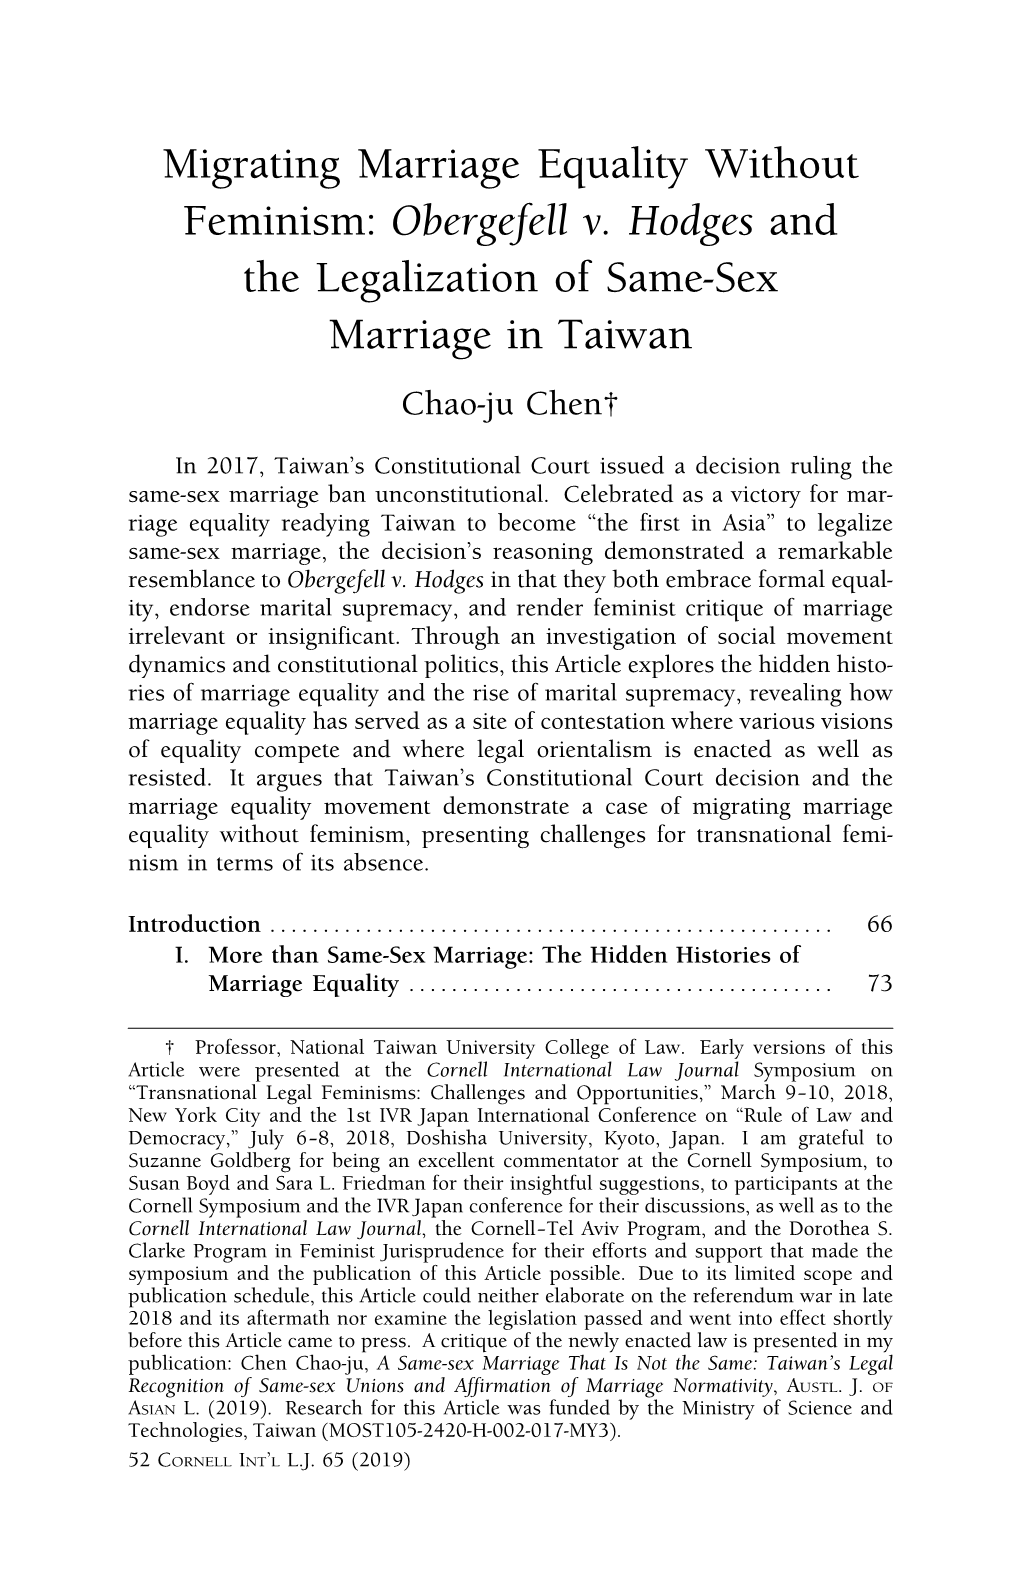 Obergefell V. Hodges and the Legalization of Same-Sex Marriage in Taiwan Chao-Ju Chen†